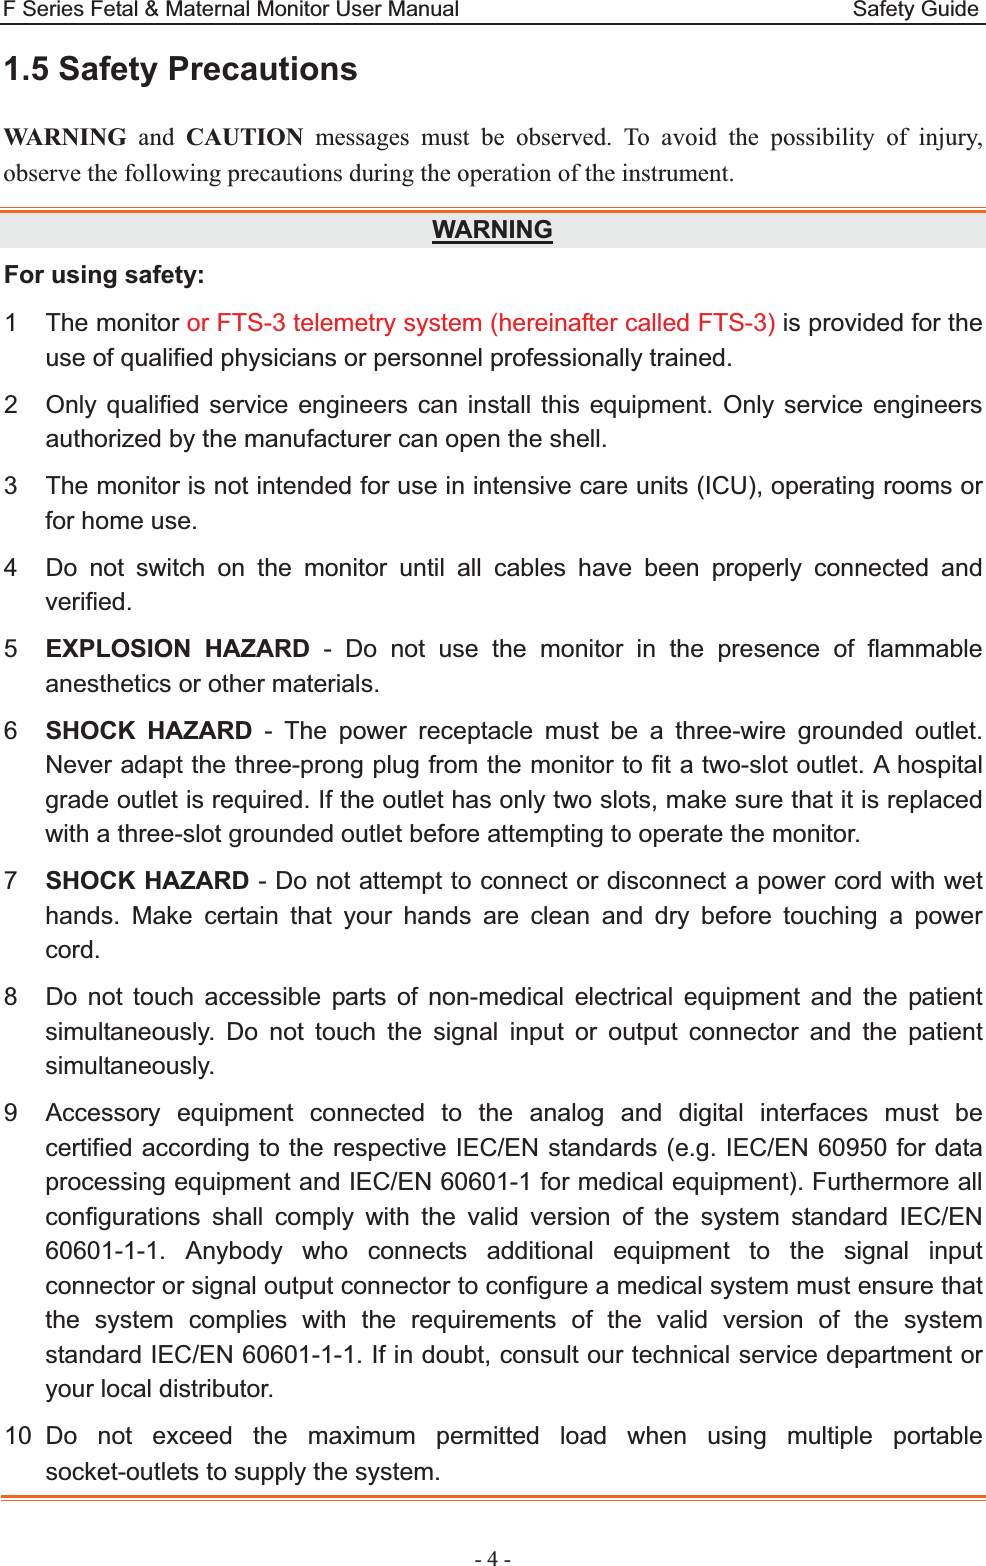 F Series Fetal &amp; Maternal Monitor User Manual                                    Safety Guide - 4 - 1.5 Safety Precautions WARNING and CAUTION messages must be observed. To avoid the possibility of injury, observe the following precautions during the operation of the instrument. WARNINGFor using safety: 1 The monitor or FTS-3 telemetry system (hereinafter called FTS-3) is provided for the use of qualified physicians or personnel professionally trained. 2  Only qualified service engineers can install this equipment. Only service engineers authorized by the manufacturer can open the shell. 3  The monitor is not intended for use in intensive care units (ICU), operating rooms or for home use. 4  Do not switch on the monitor until all cables have been properly connected and verified. 5  EXPLOSION HAZARD - Do not use the monitor in the presence of flammable anesthetics or other materials. 6  SHOCK HAZARD - The power receptacle must be a three-wire grounded outlet. Never adapt the three-prong plug from the monitor to fit a two-slot outlet. A hospital grade outlet is required. If the outlet has only two slots, make sure that it is replaced with a three-slot grounded outlet before attempting to operate the monitor. 7  SHOCK HAZARD - Do not attempt to connect or disconnect a power cord with wet hands. Make certain that your hands are clean and dry before touching a power cord. 8  Do not touch accessible parts of non-medical electrical equipment and the patient simultaneously. Do not touch the signal input or output connector and the patient simultaneously. 9  Accessory equipment connected to the analog and digital interfaces must be certified according to the respective IEC/EN standards (e.g. IEC/EN 60950 for data processing equipment and IEC/EN 60601-1 for medical equipment). Furthermore all configurations shall comply with the valid version of the system standard IEC/EN 60601-1-1. Anybody who connects additional equipment to the signal input connector or signal output connector to configure a medical system must ensure that the system complies with the requirements of the valid version of the system standard IEC/EN 60601-1-1. If in doubt, consult our technical service department or your local distributor. 10 Do not exceed the maximum permitted load when using multiple portable socket-outlets to supply the system. 